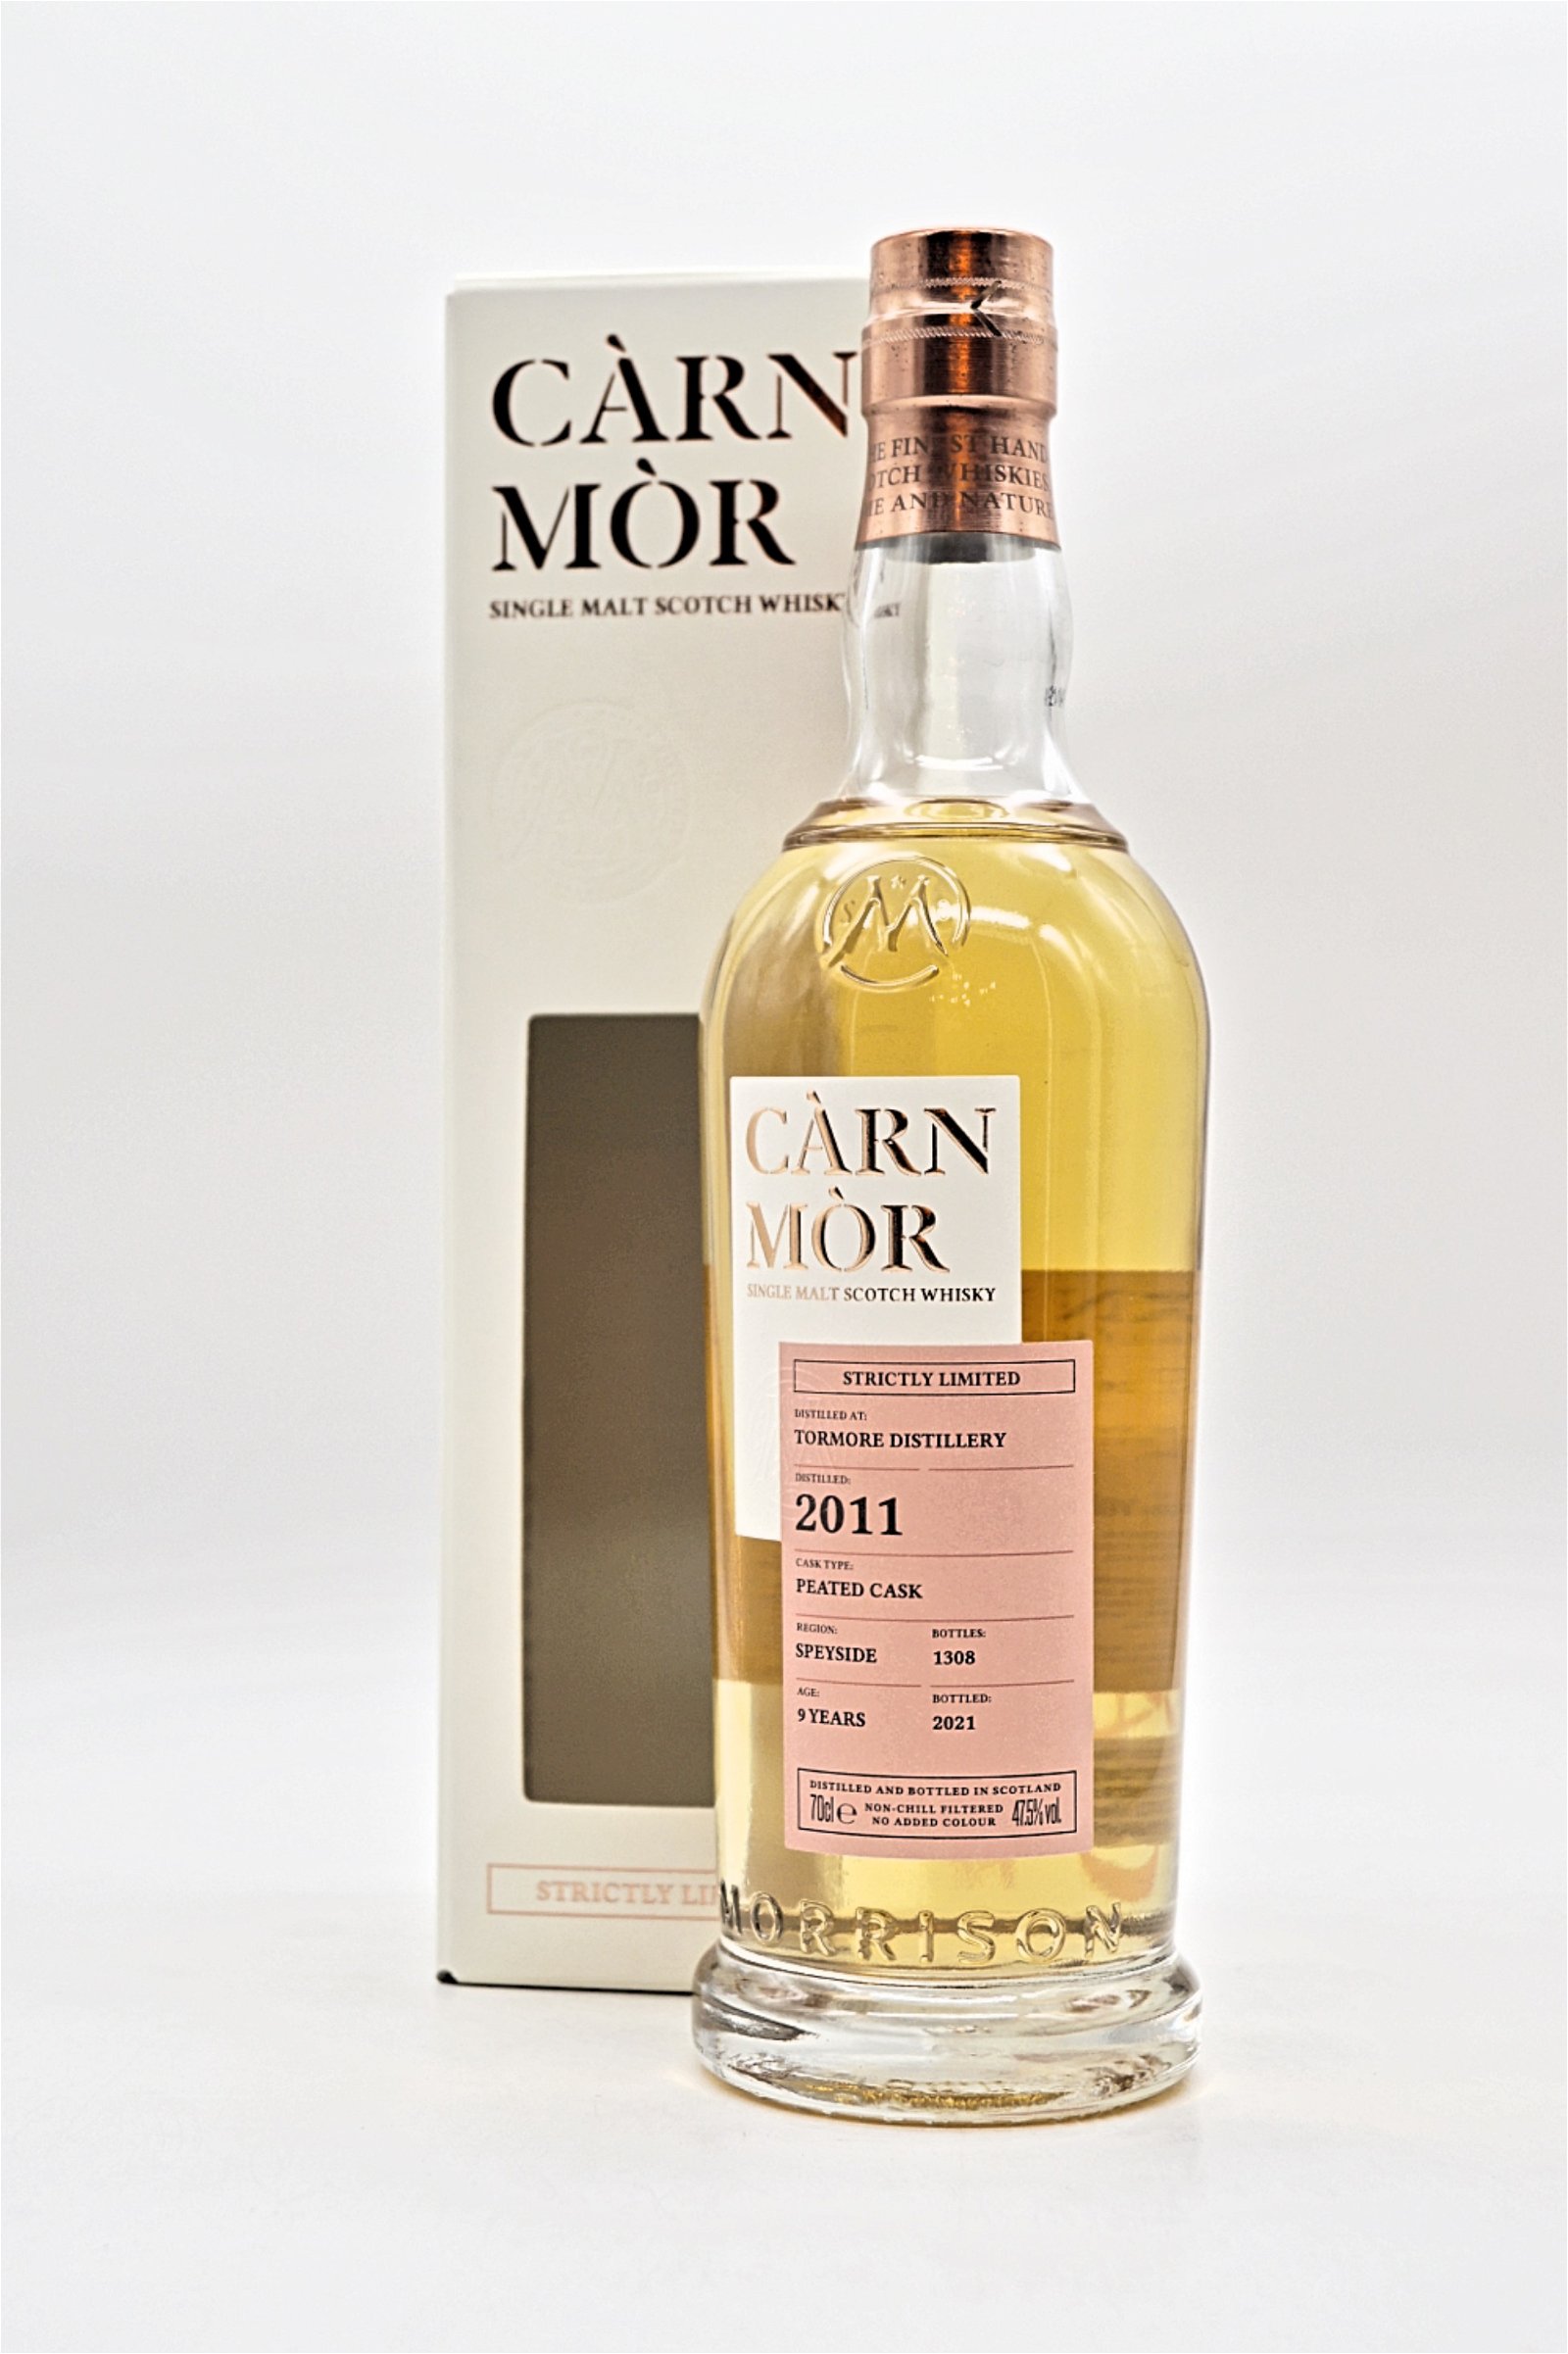 Carn Mor Tormore 2011 Peated Cask Strictly Limited Single Malt Scotch Whisky